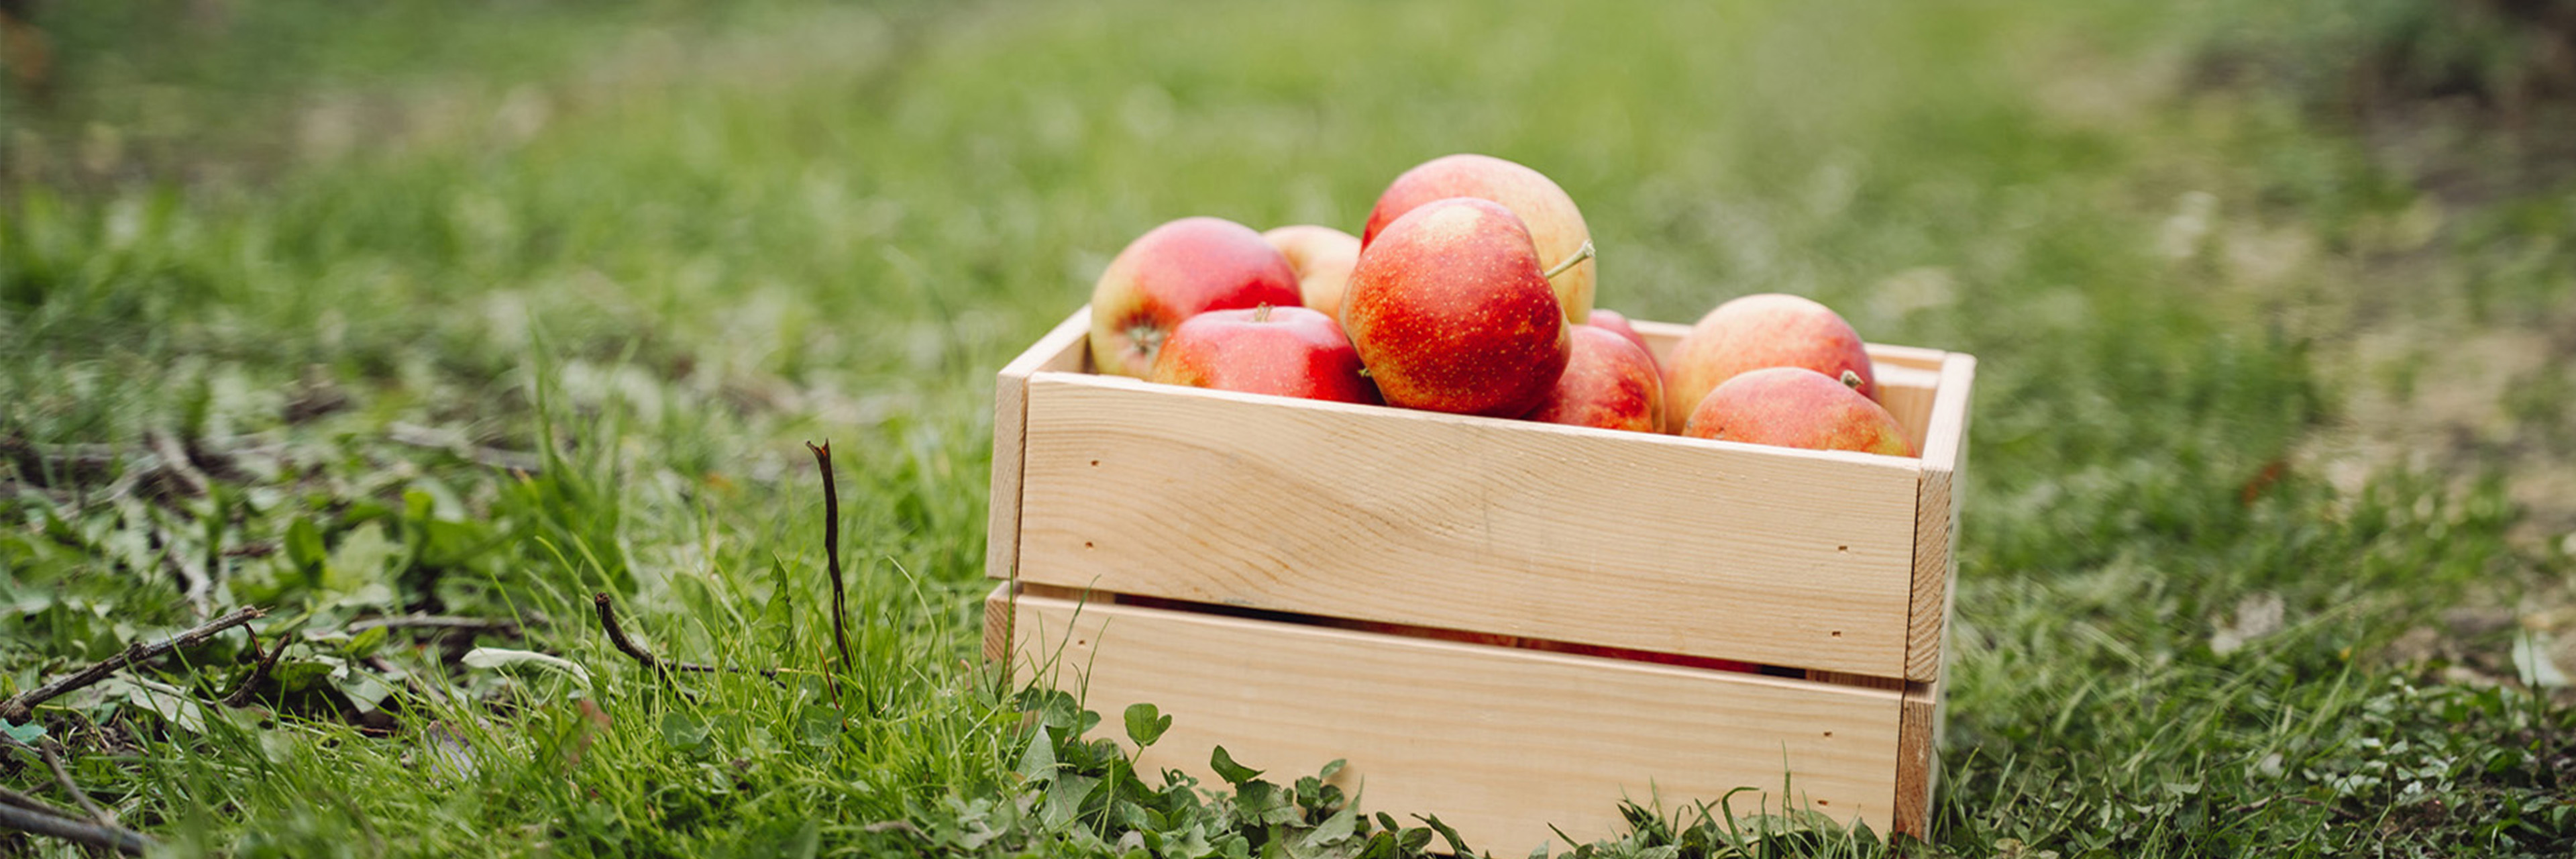 A basket of just-picked apples sits in the grass, suggesting growth and harvest